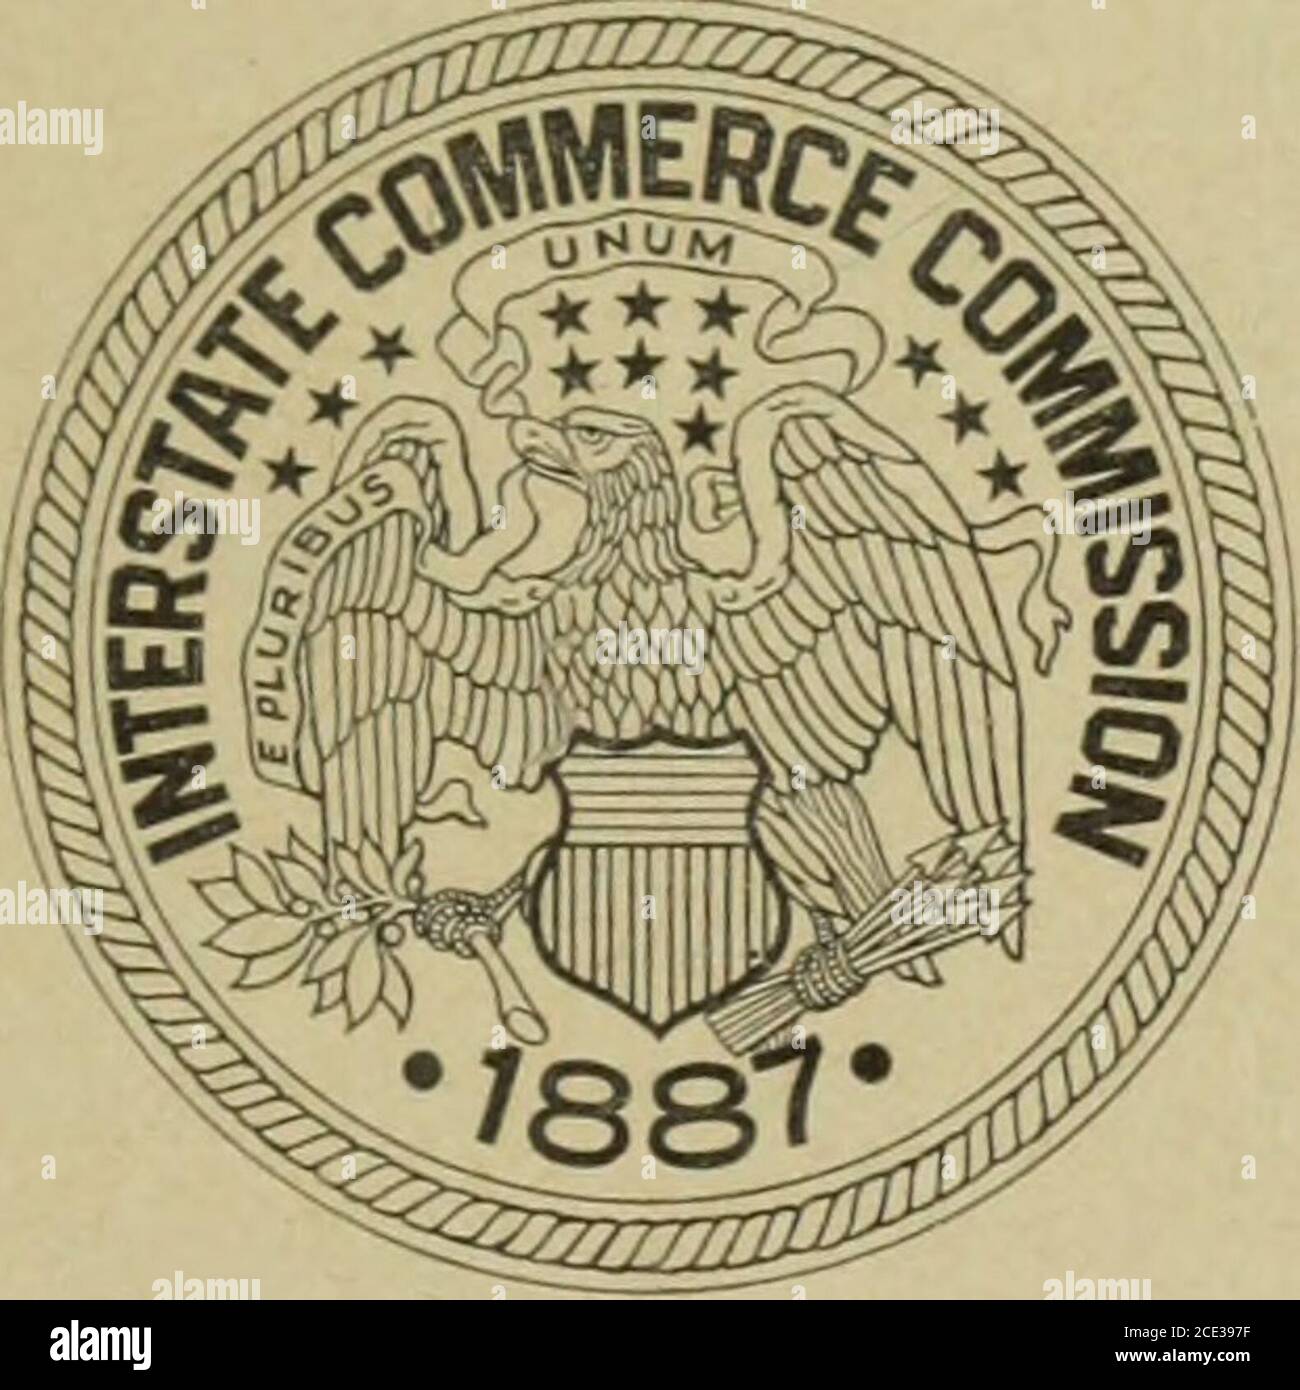 . Annual report of the Interstate Commerce Commission . U.S. GOVERNMENT PRINTING OFFICEWASHINGTON : 1964 For sale by the Superintendent of Documents, U.S. Government Printing OfficeWashington, D.C., 20402 - Price $1.75 (cloth) INTERSTATE COMMERCE COMMISSION LAUEENCE K. WALRATH, Chairman ABE McGREGOR GOFF, Vice Chairman HOWARD G. FREAS KENNETH H. TUGGLE EVERETT HUTCHINSON RUPERT L. MURPHY CHARLES A. WEBB CLYDE E. HERRING JOHN W. BUSH WILLIAM H. TUCKER PAUL J. TIERNEY Harold D. McCoy, Secretary CONTENTS Page Introduction 1 The Commission 2 Employee Boards 2 Analysis of Developments—-Recommendati Stock Photo